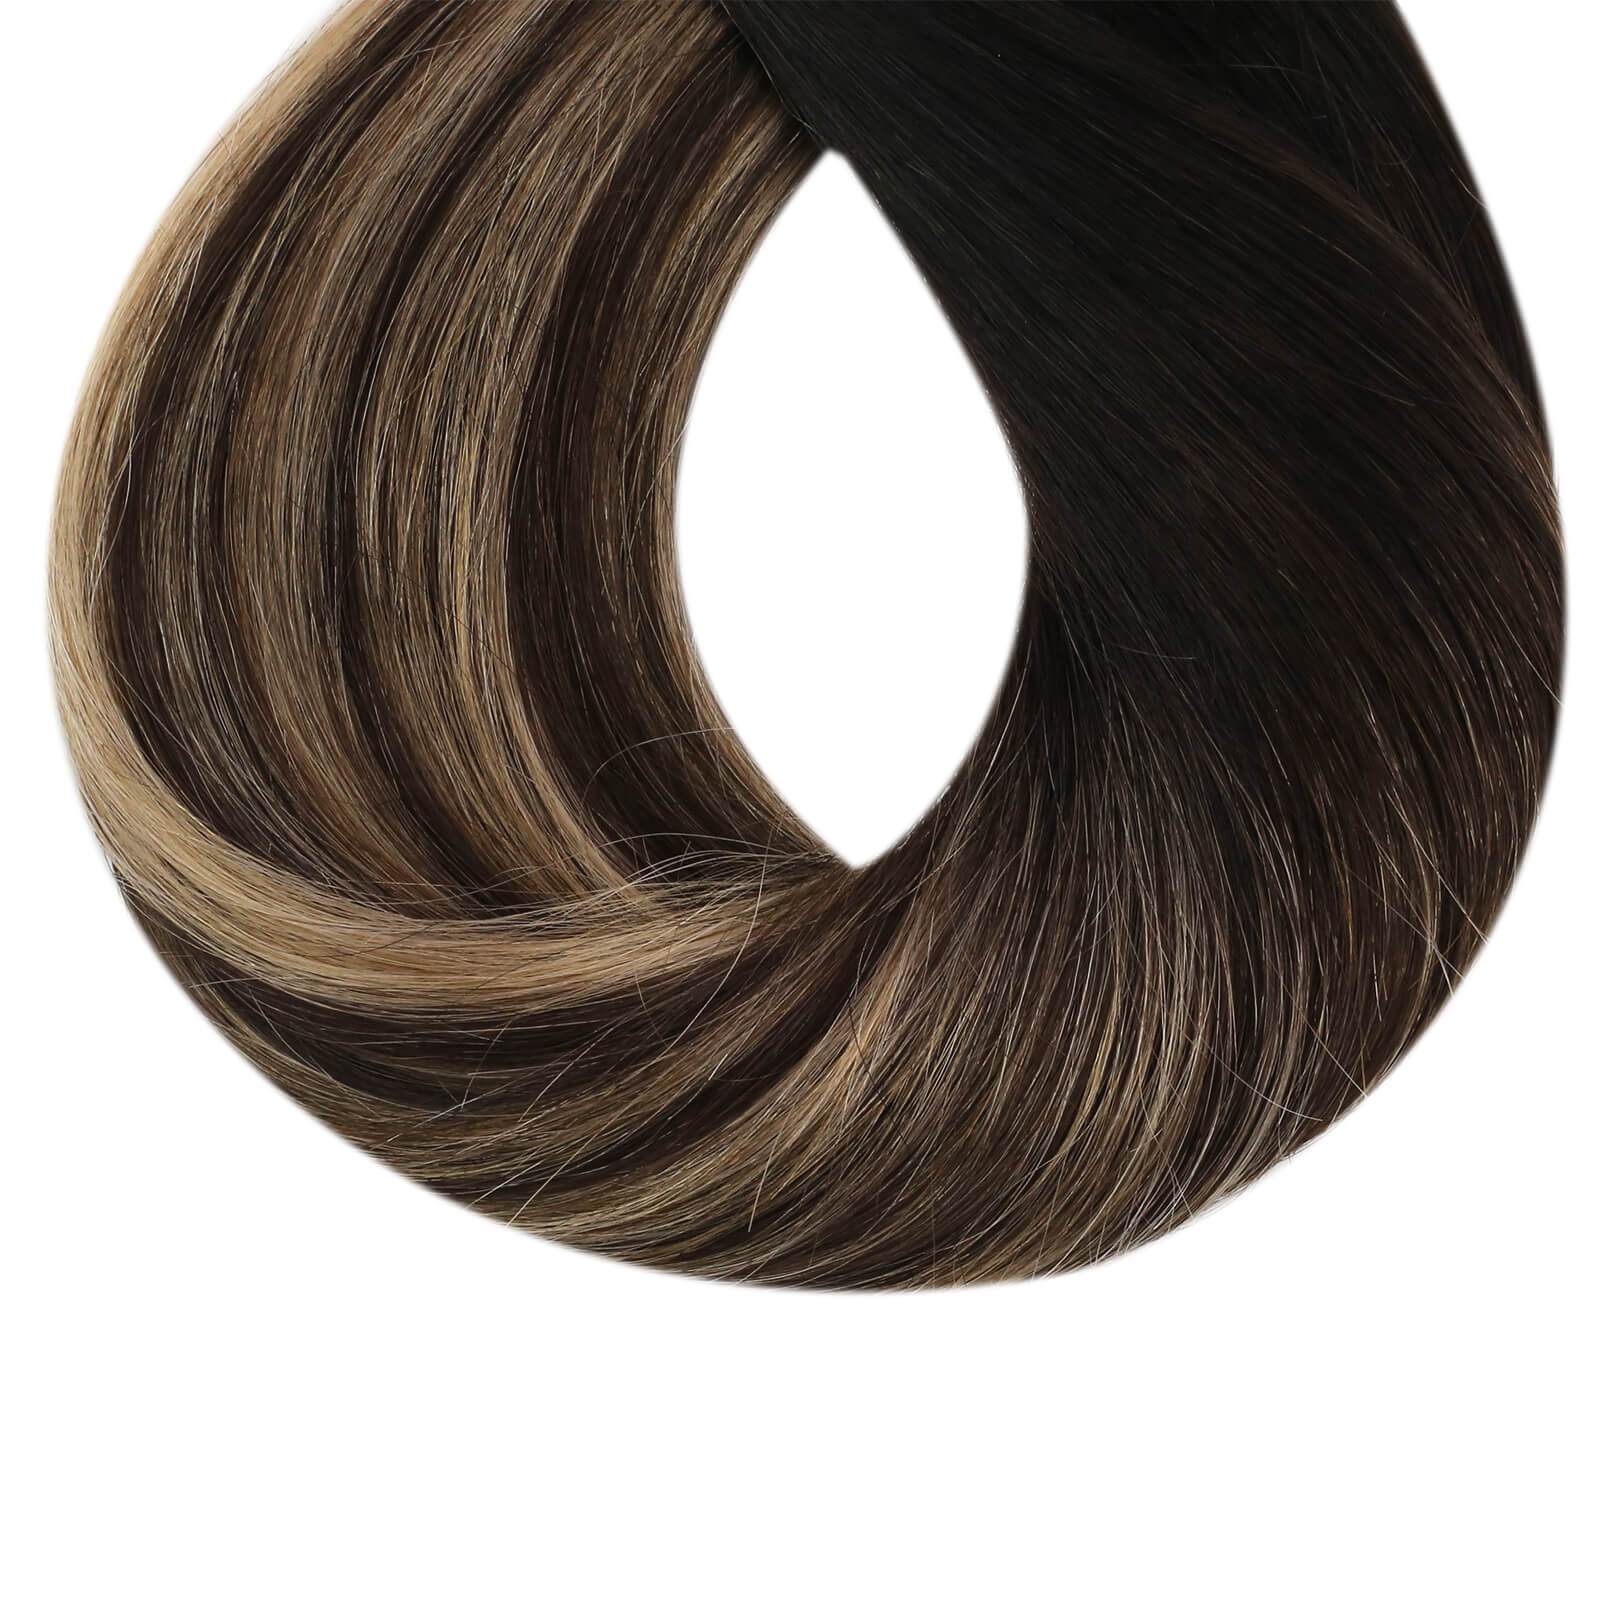 Pre Bonded U Tip Human Hair Extensions 1B Black Mixed with 4 Brown and 27